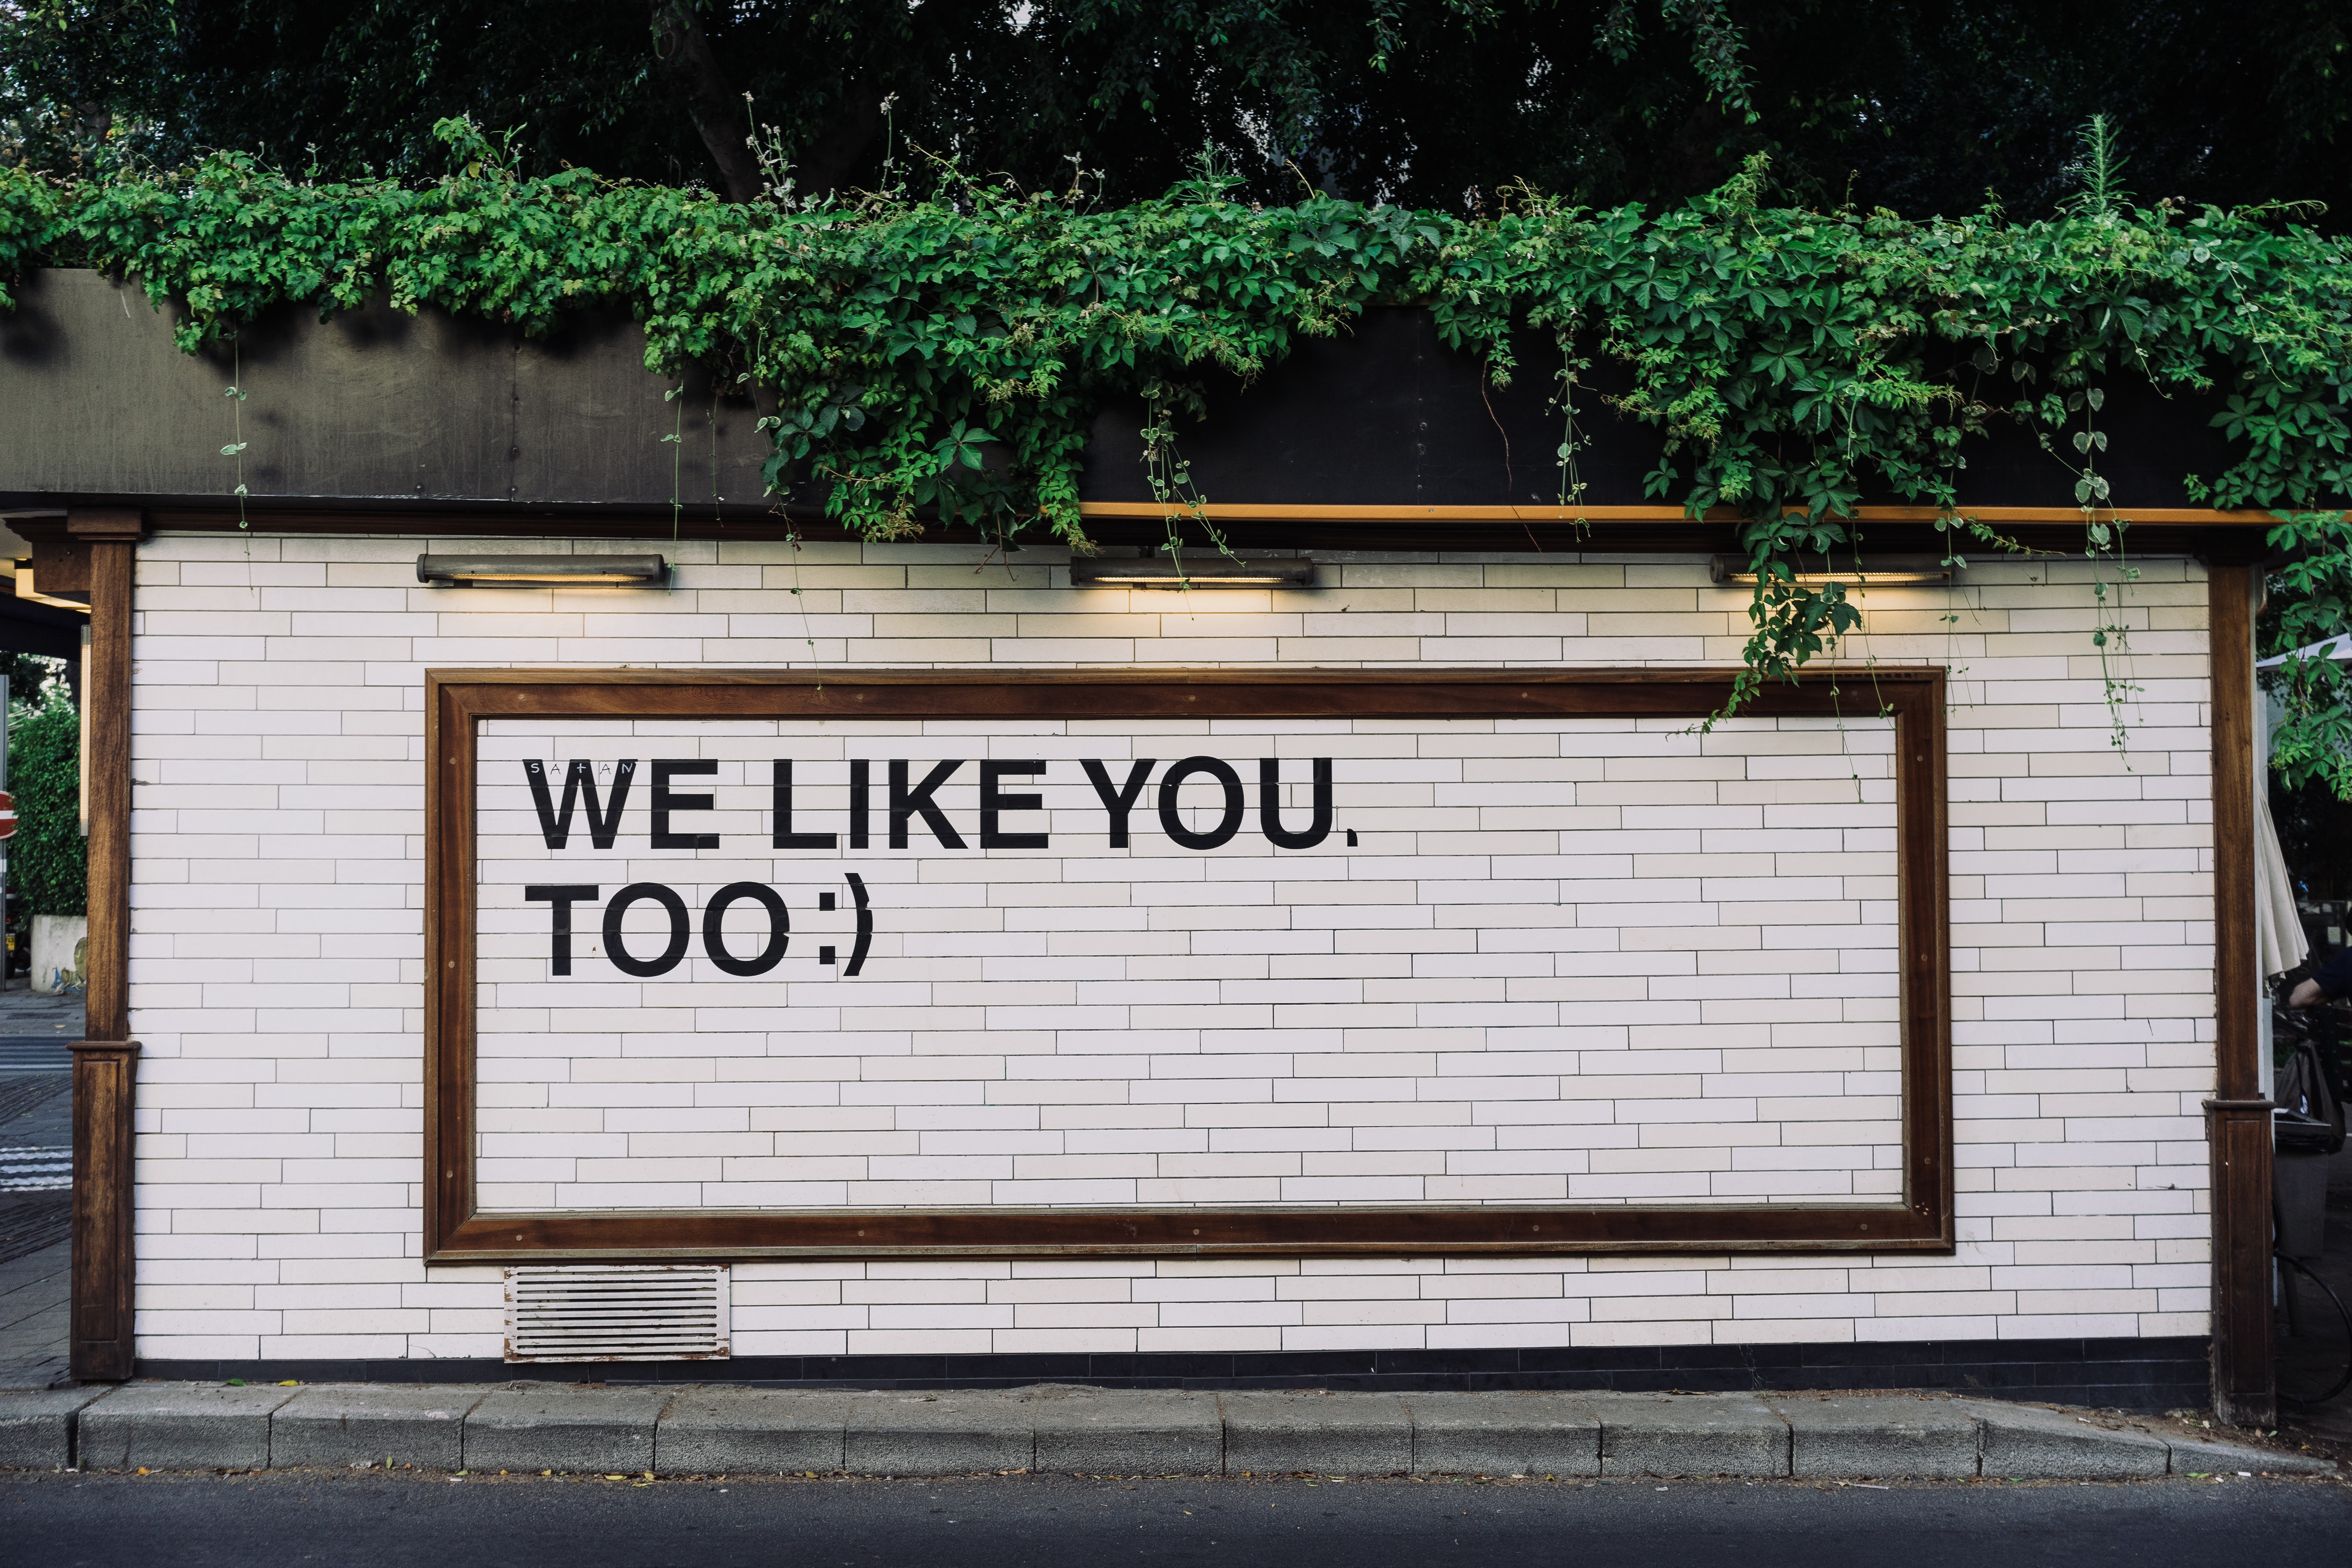 A photo of a white brick wall with the phrase “We Like You, Too :)” printed on it.